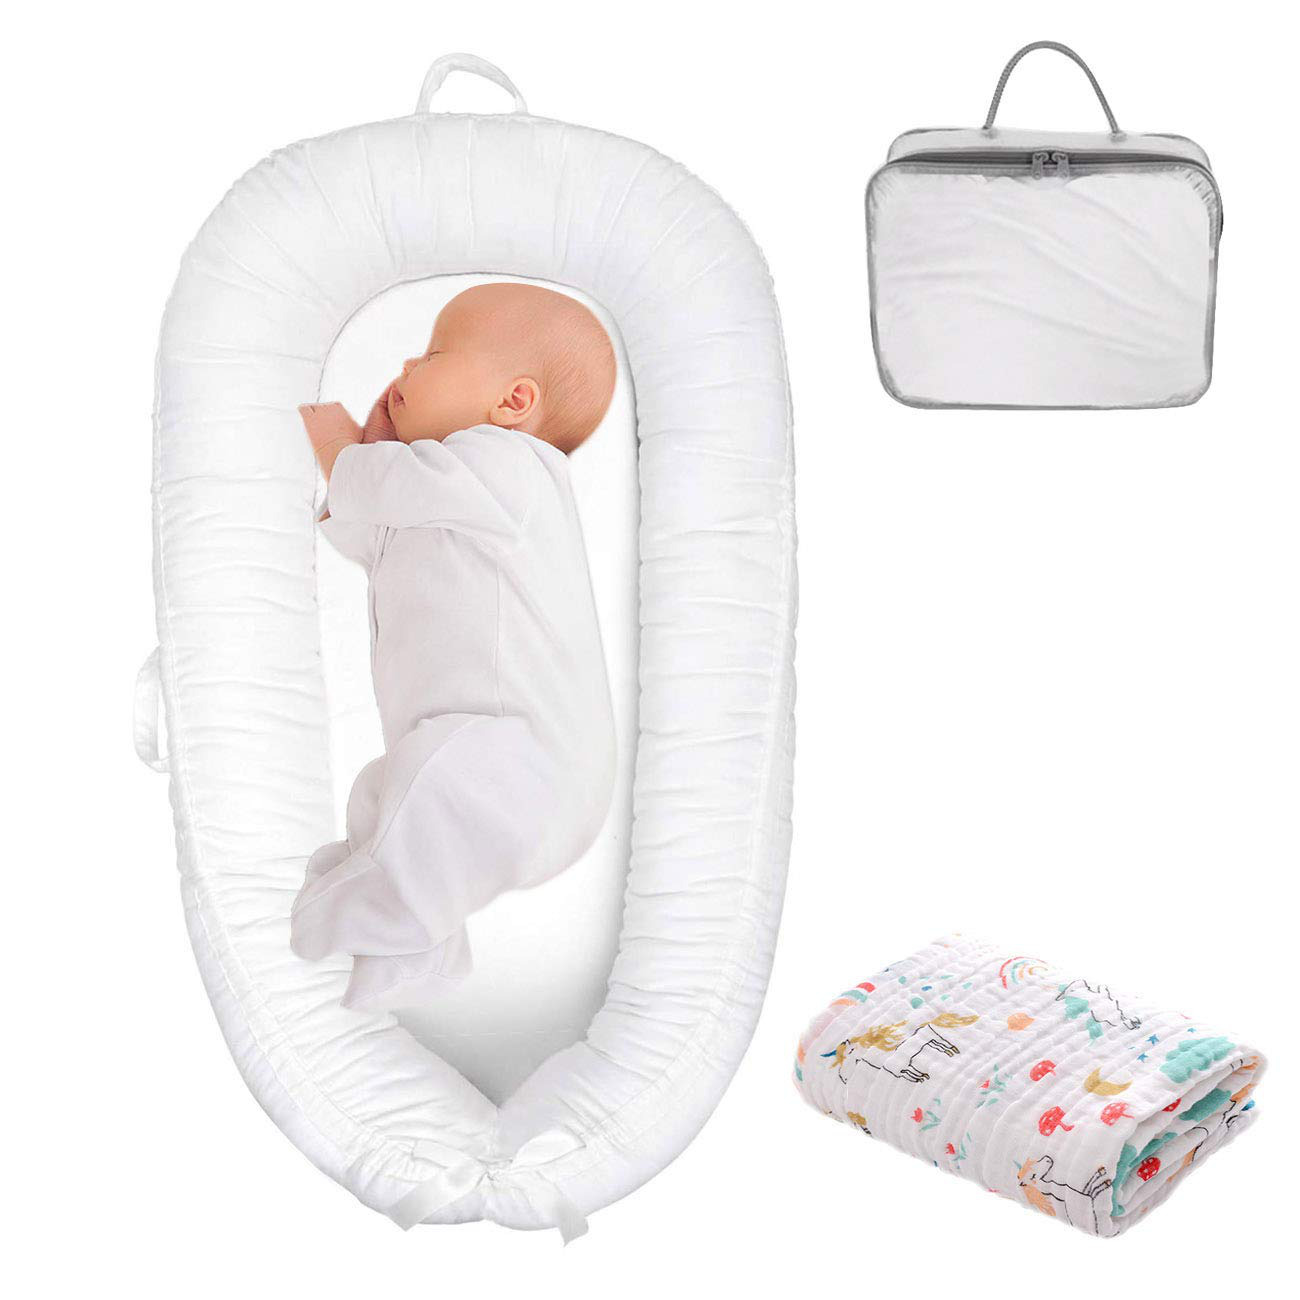 Houseyuan Baby Bassinet Baby Lounger Co-sleeping Baby Bed Cotton Portable Crib B